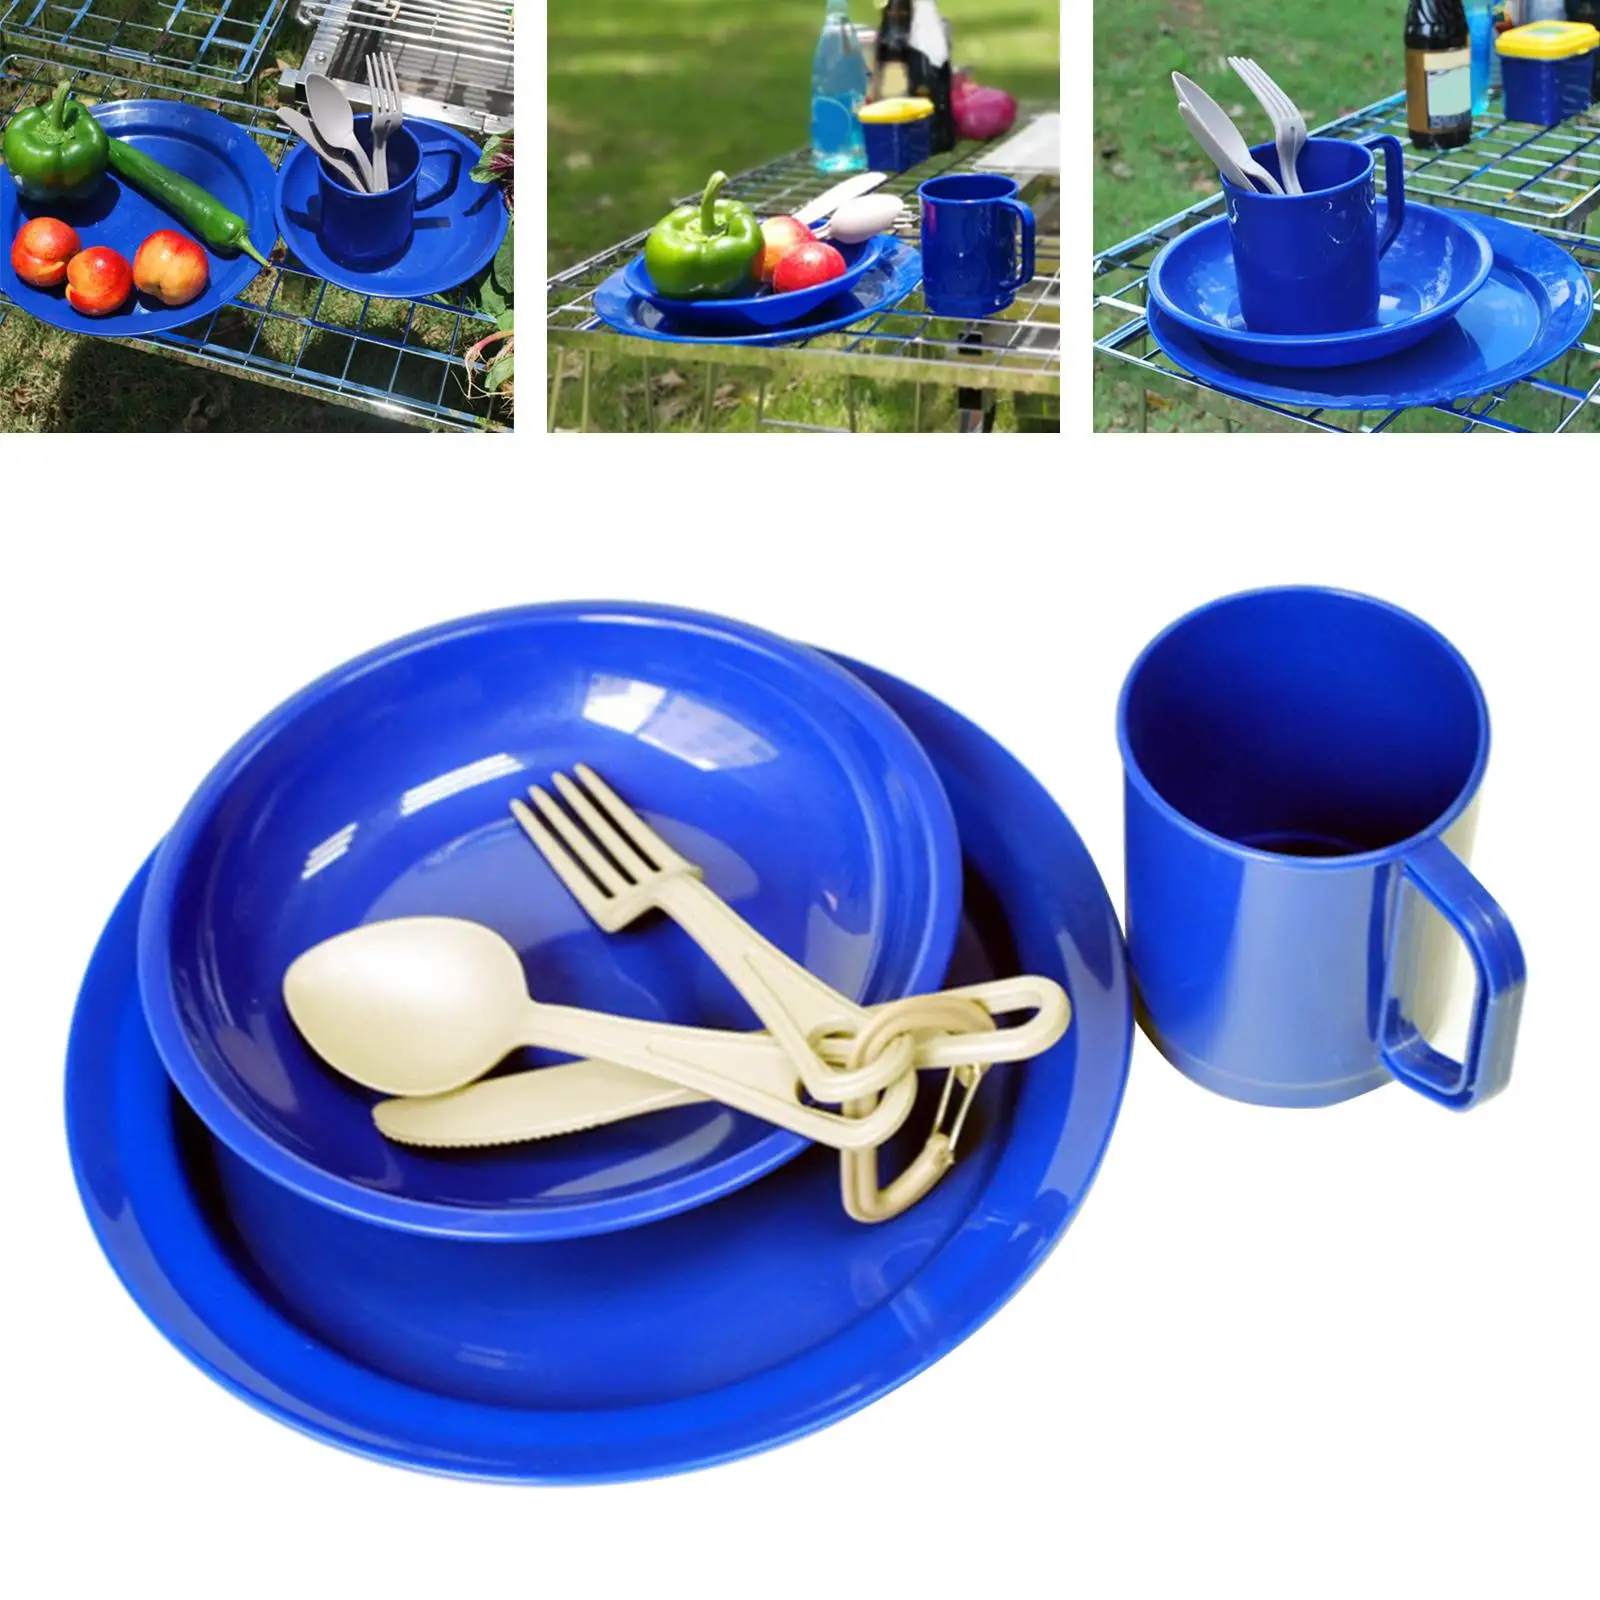 6x Outdoor Camping Tableware Set Fork Spoon with Mesh Carry Bag for Survival